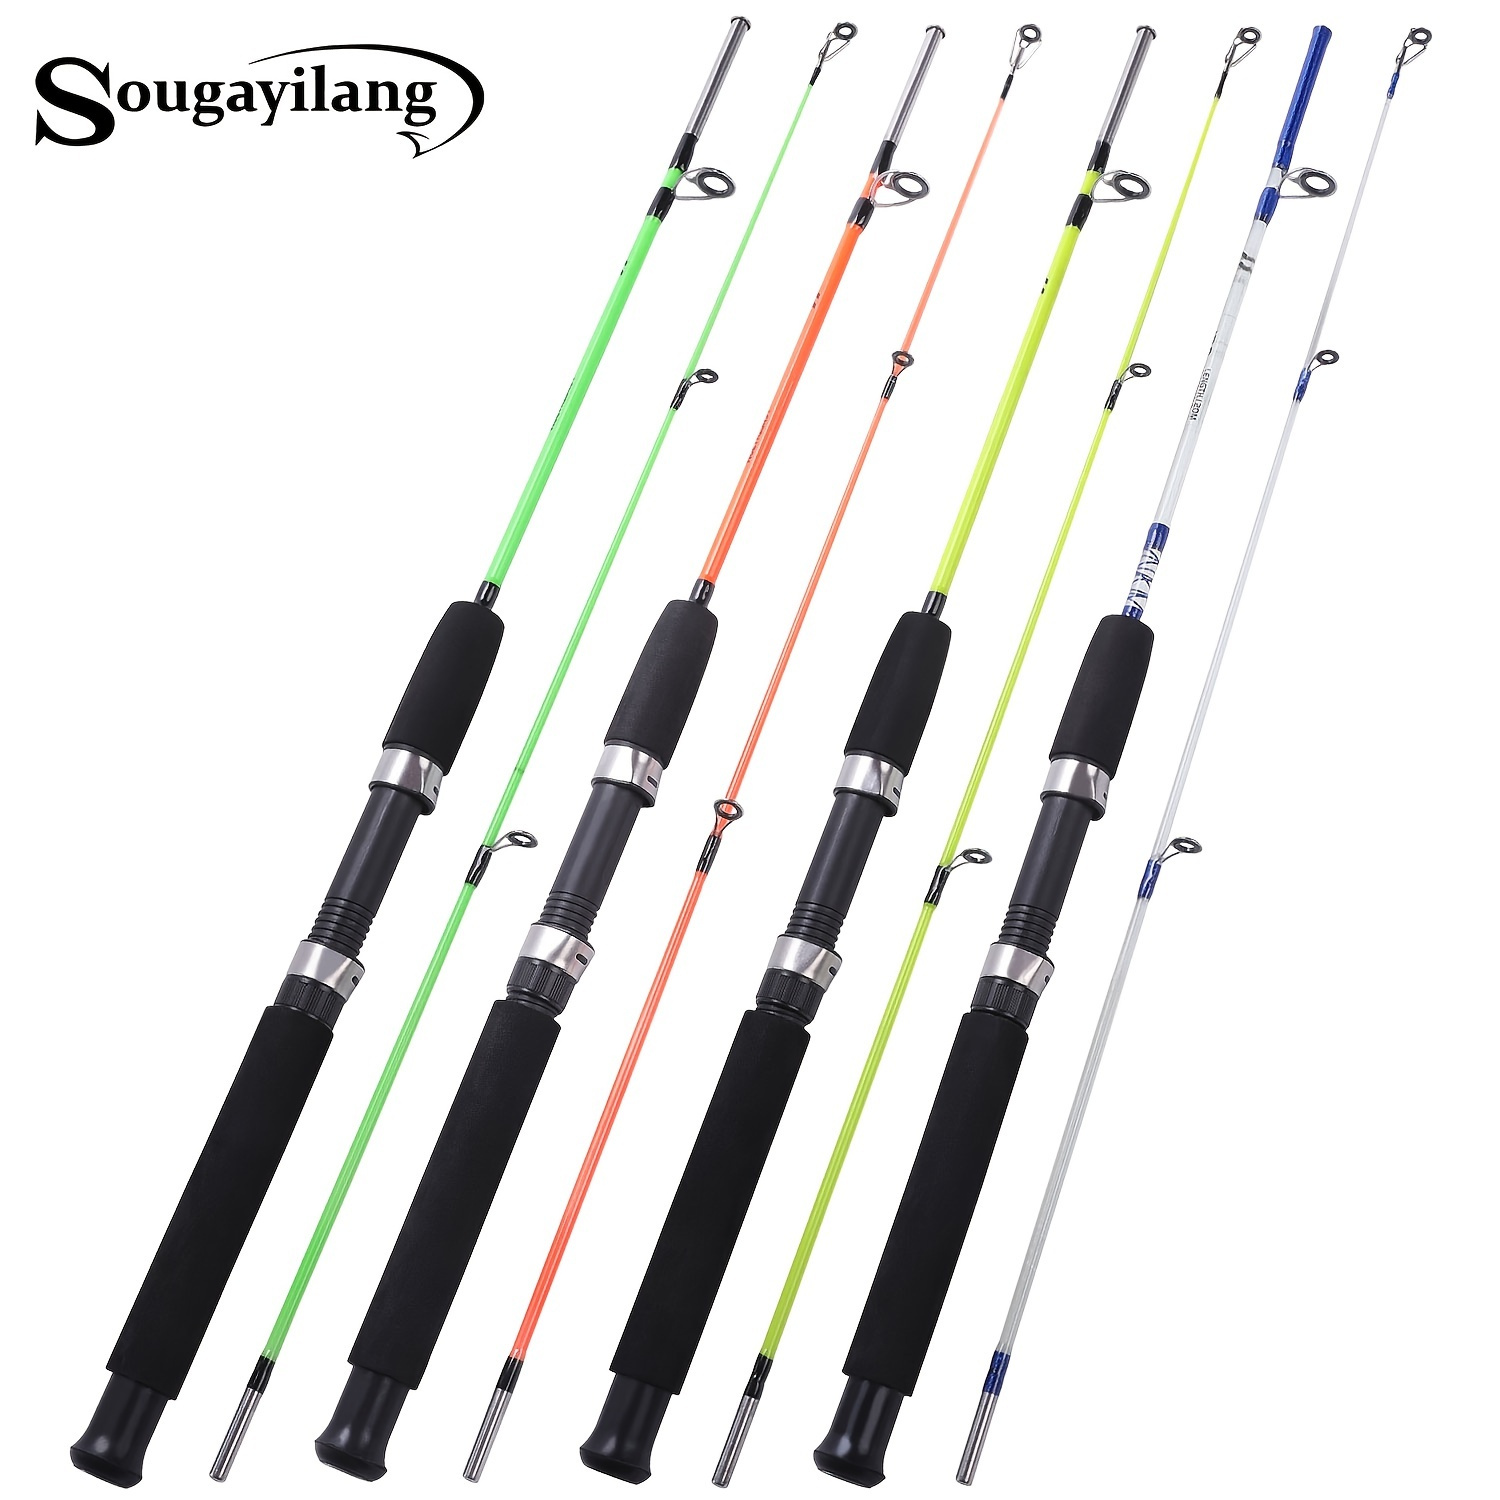 

Ultra Light Spinning Fishing Rod With Eva Handle - Multi-color & Two-section Design